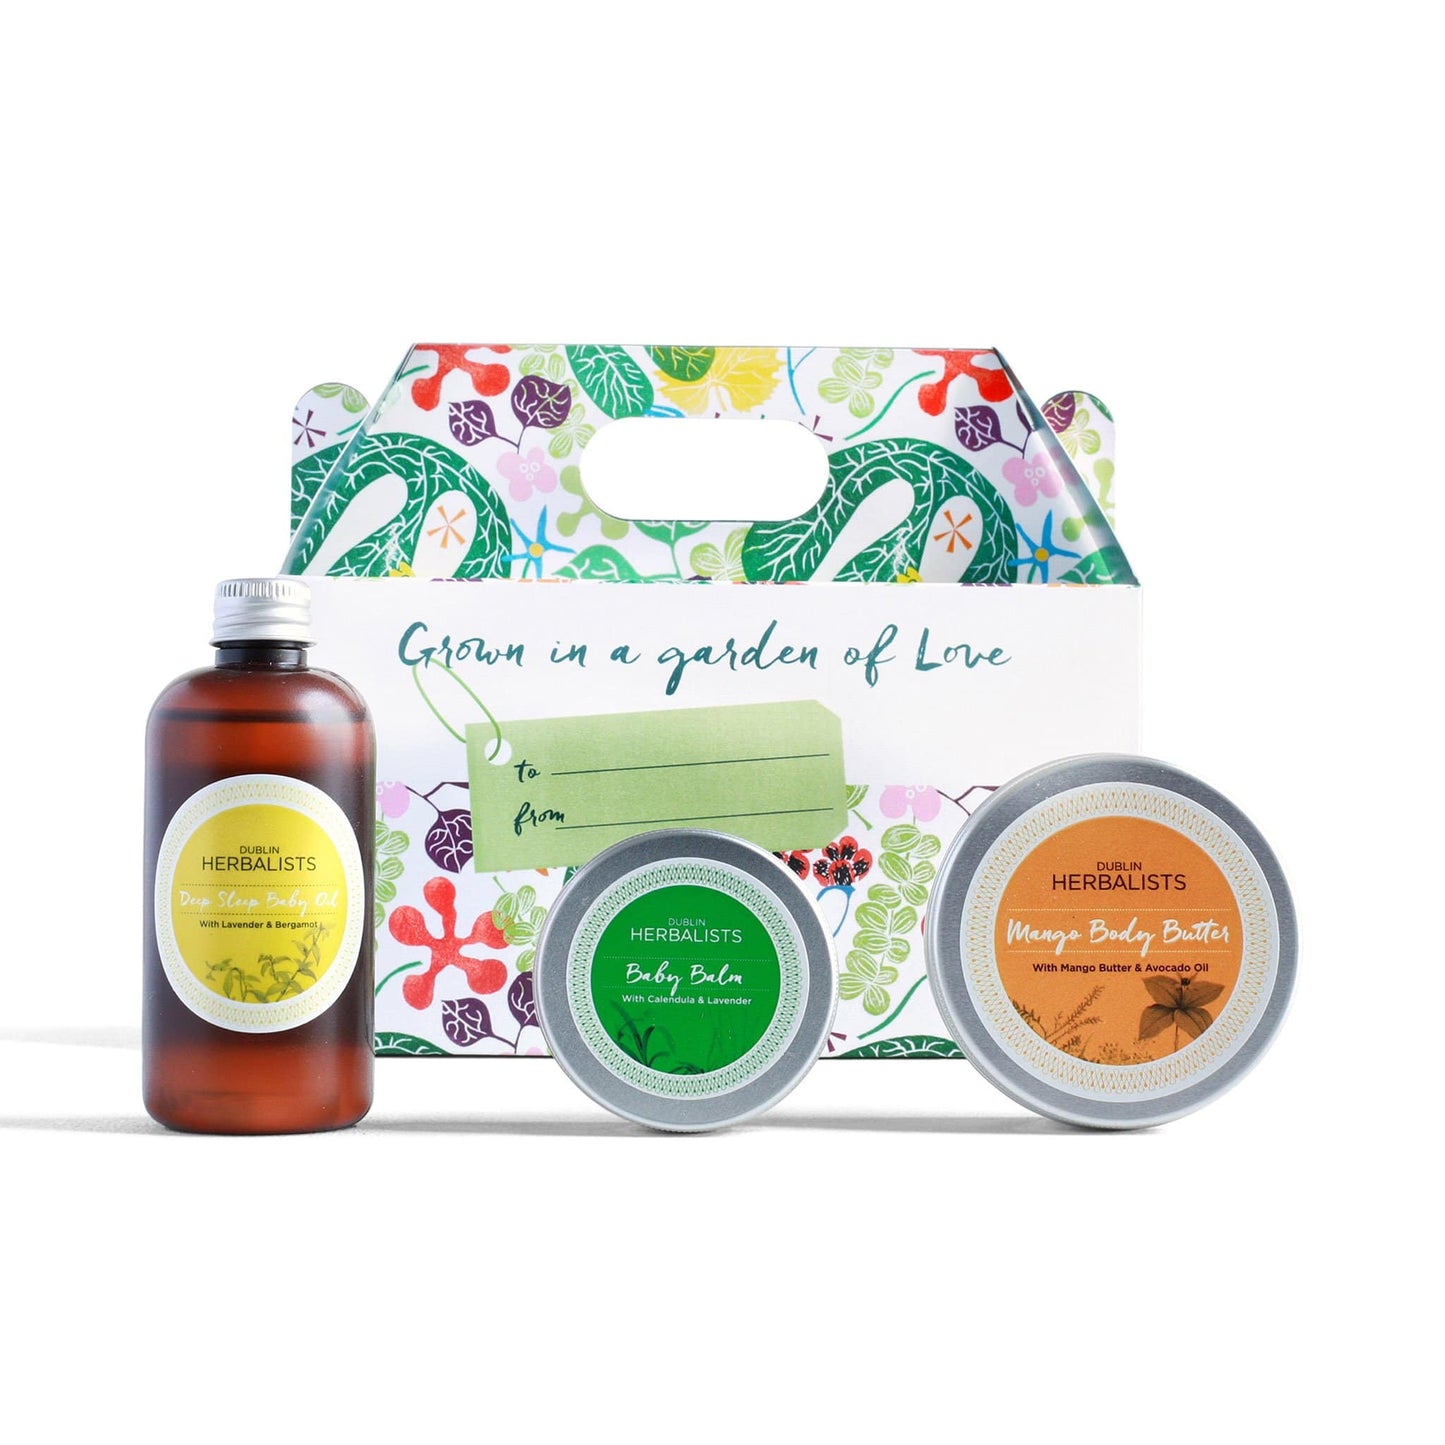 Dublin Herbalists Gift Box New Baby Collection Gift Set - Dublin Herbalists